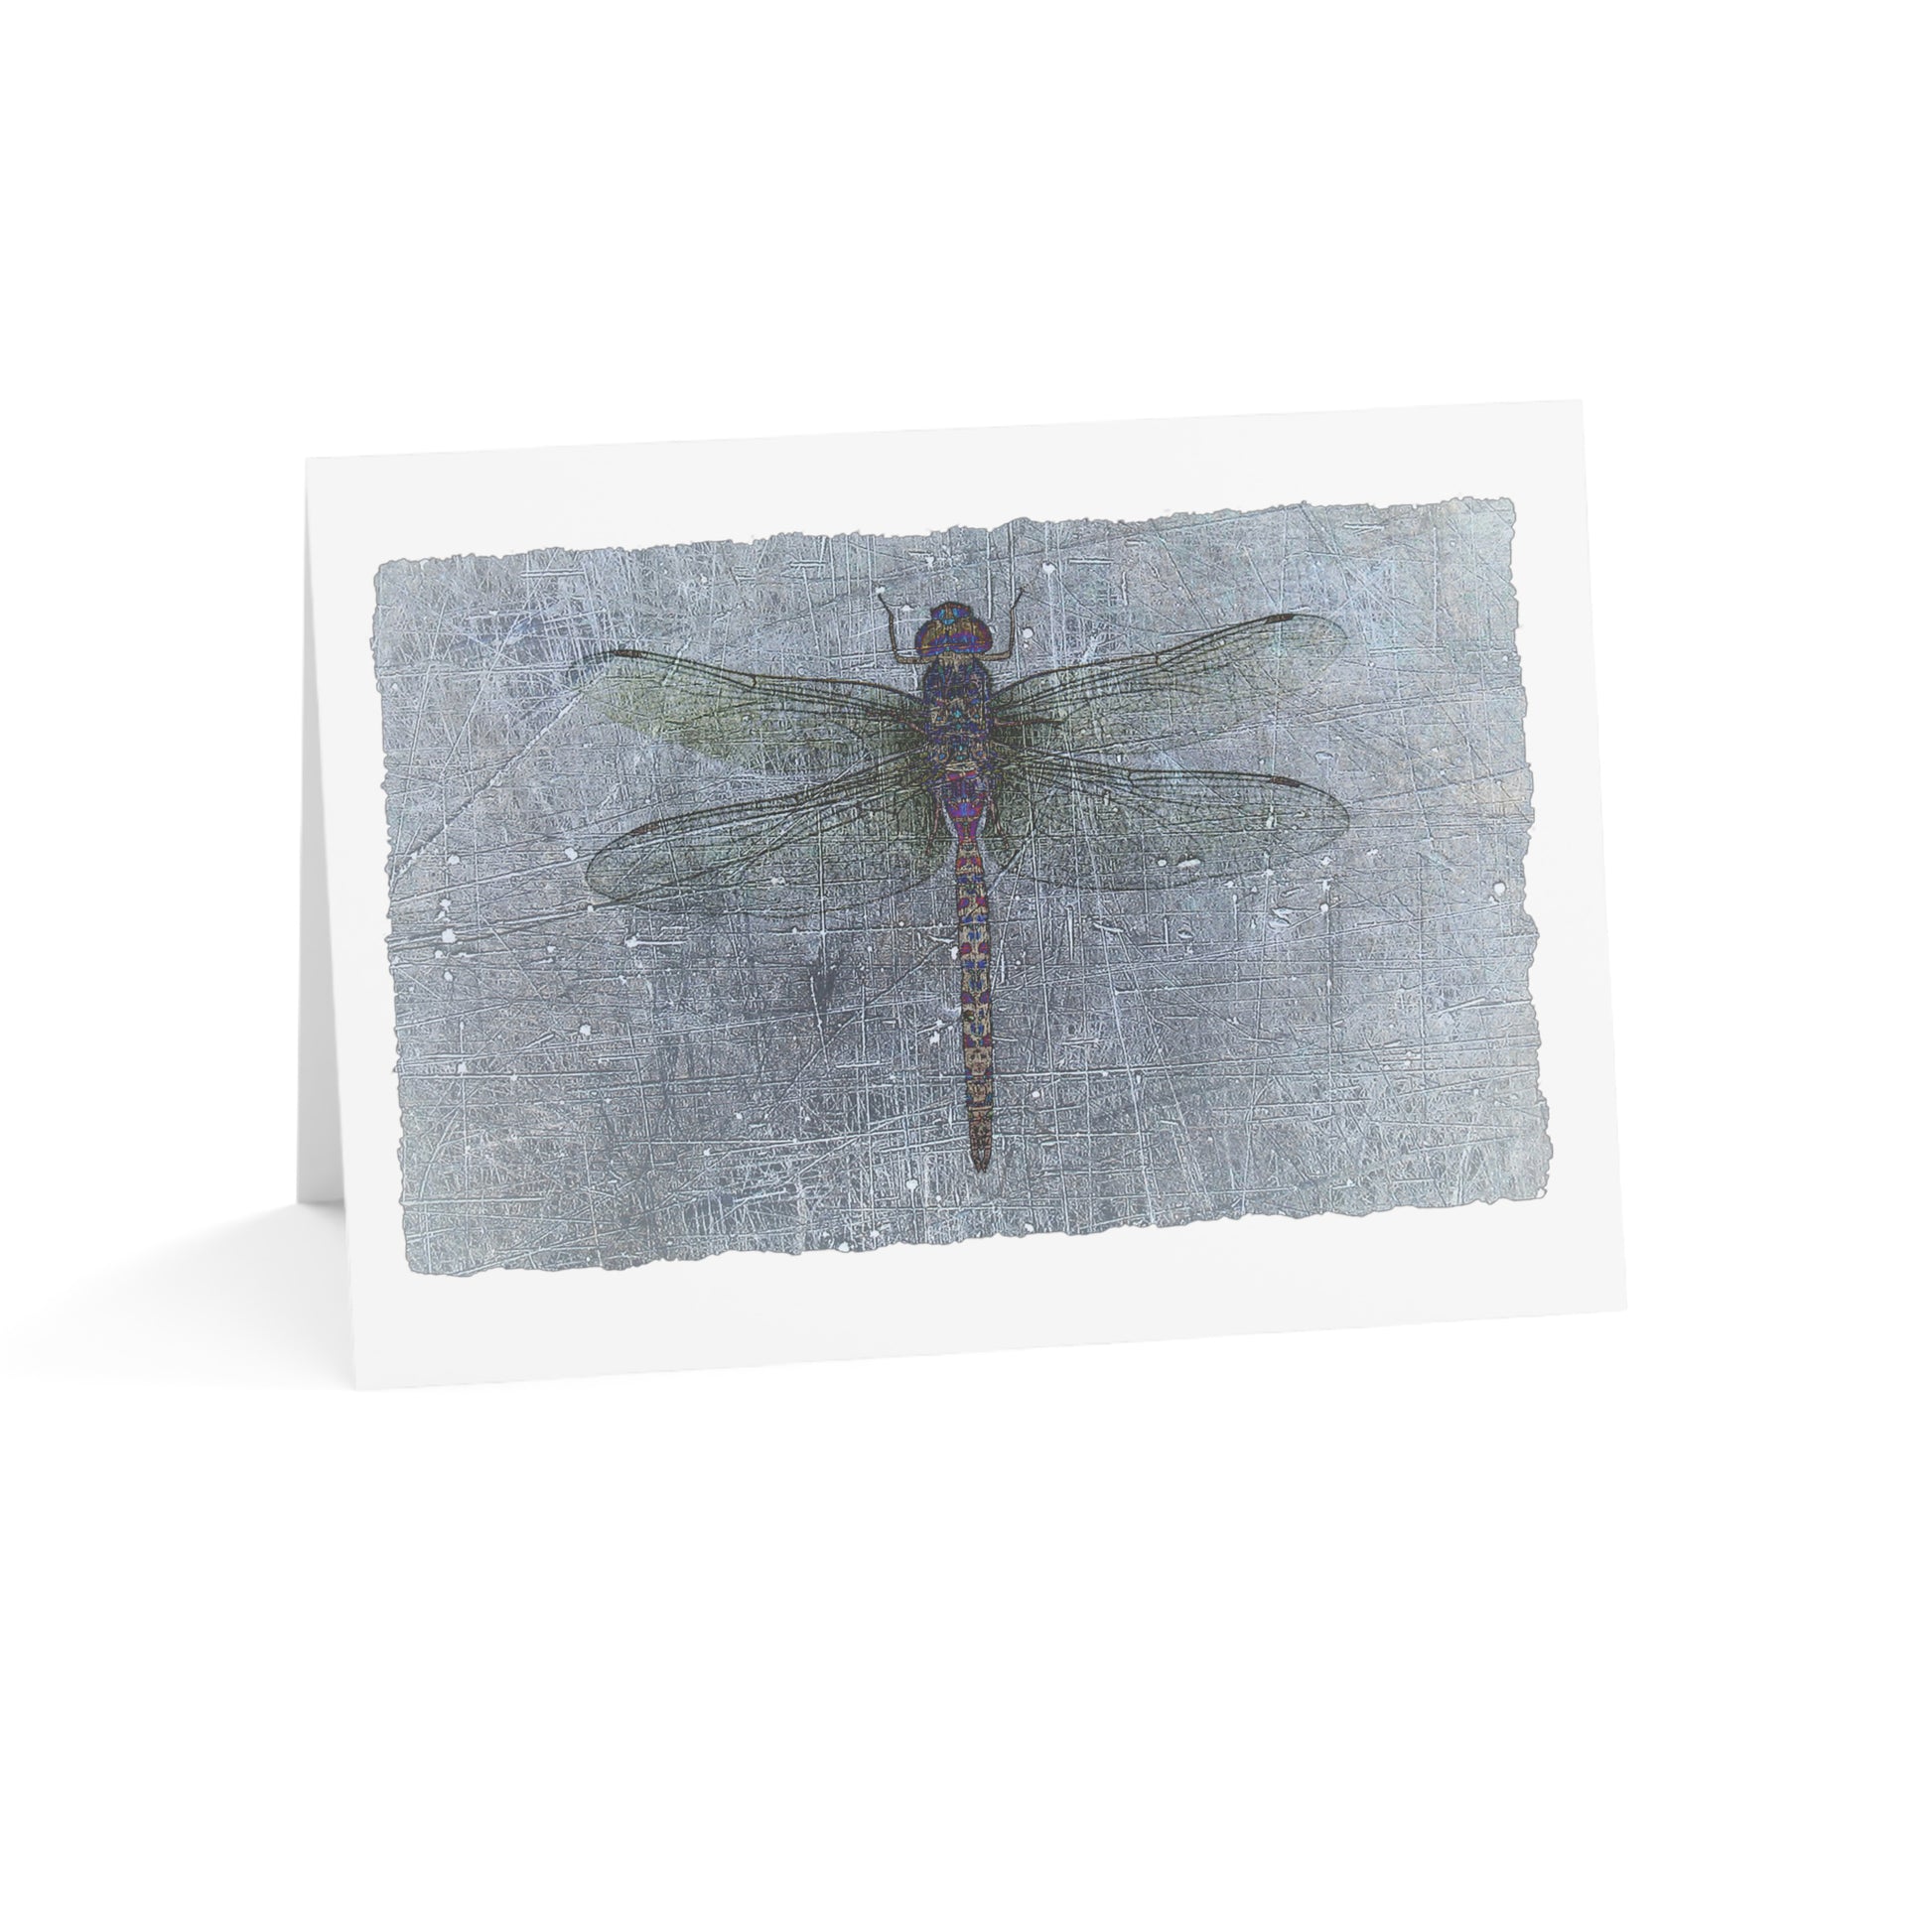 Dragonfly Print Greeting Cards Blue Gray Dragonflies Stationery and Blank Cards side view